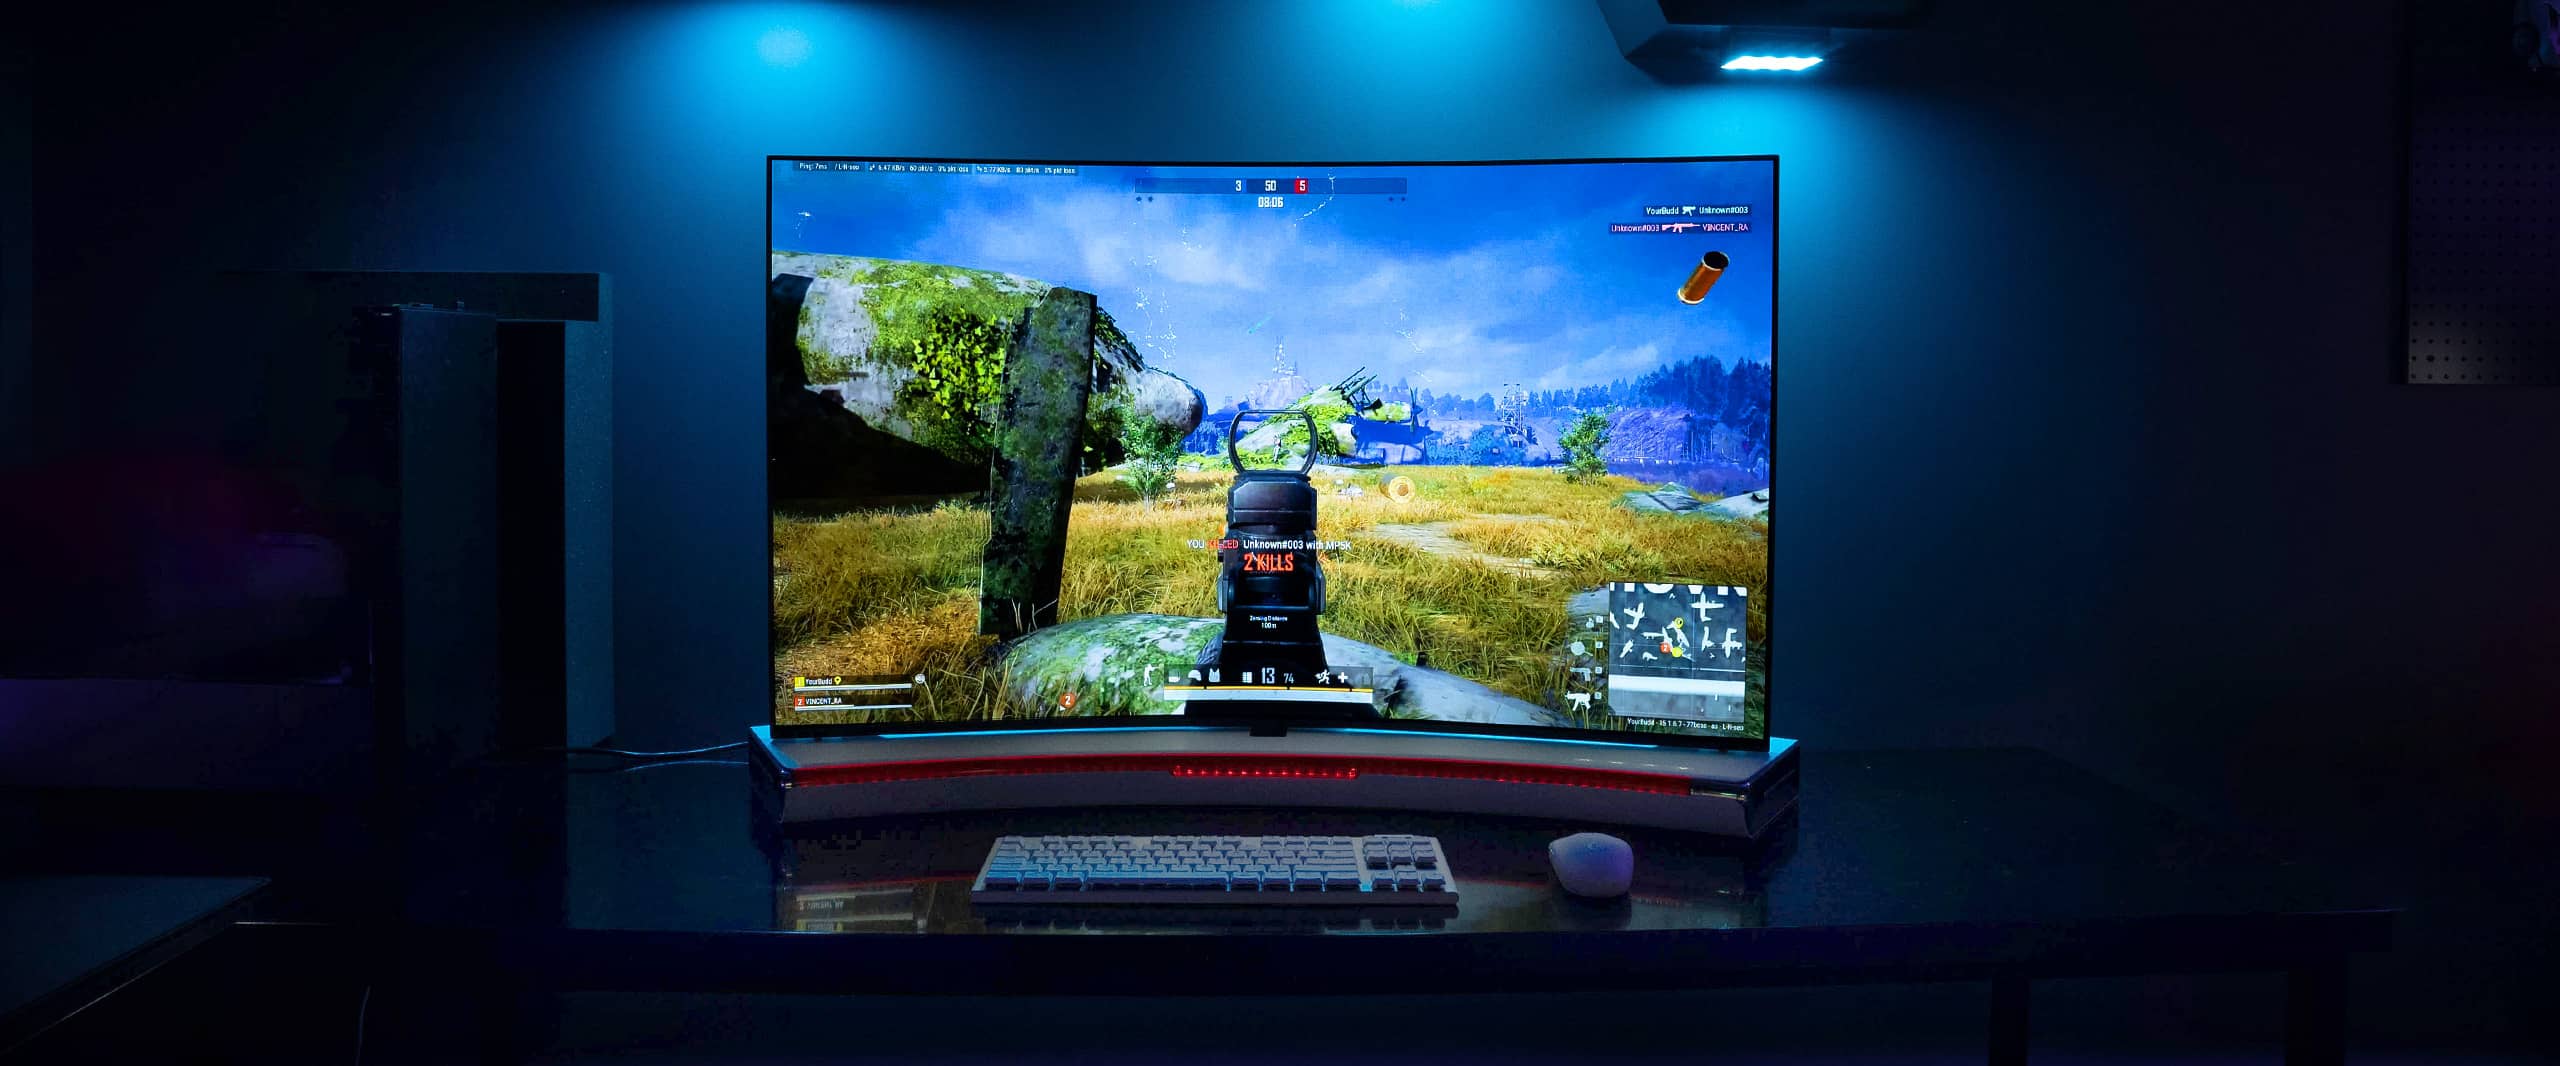 The game is being played on the Bendable Gaming OLED display, and keyboards and monitors are visible below.